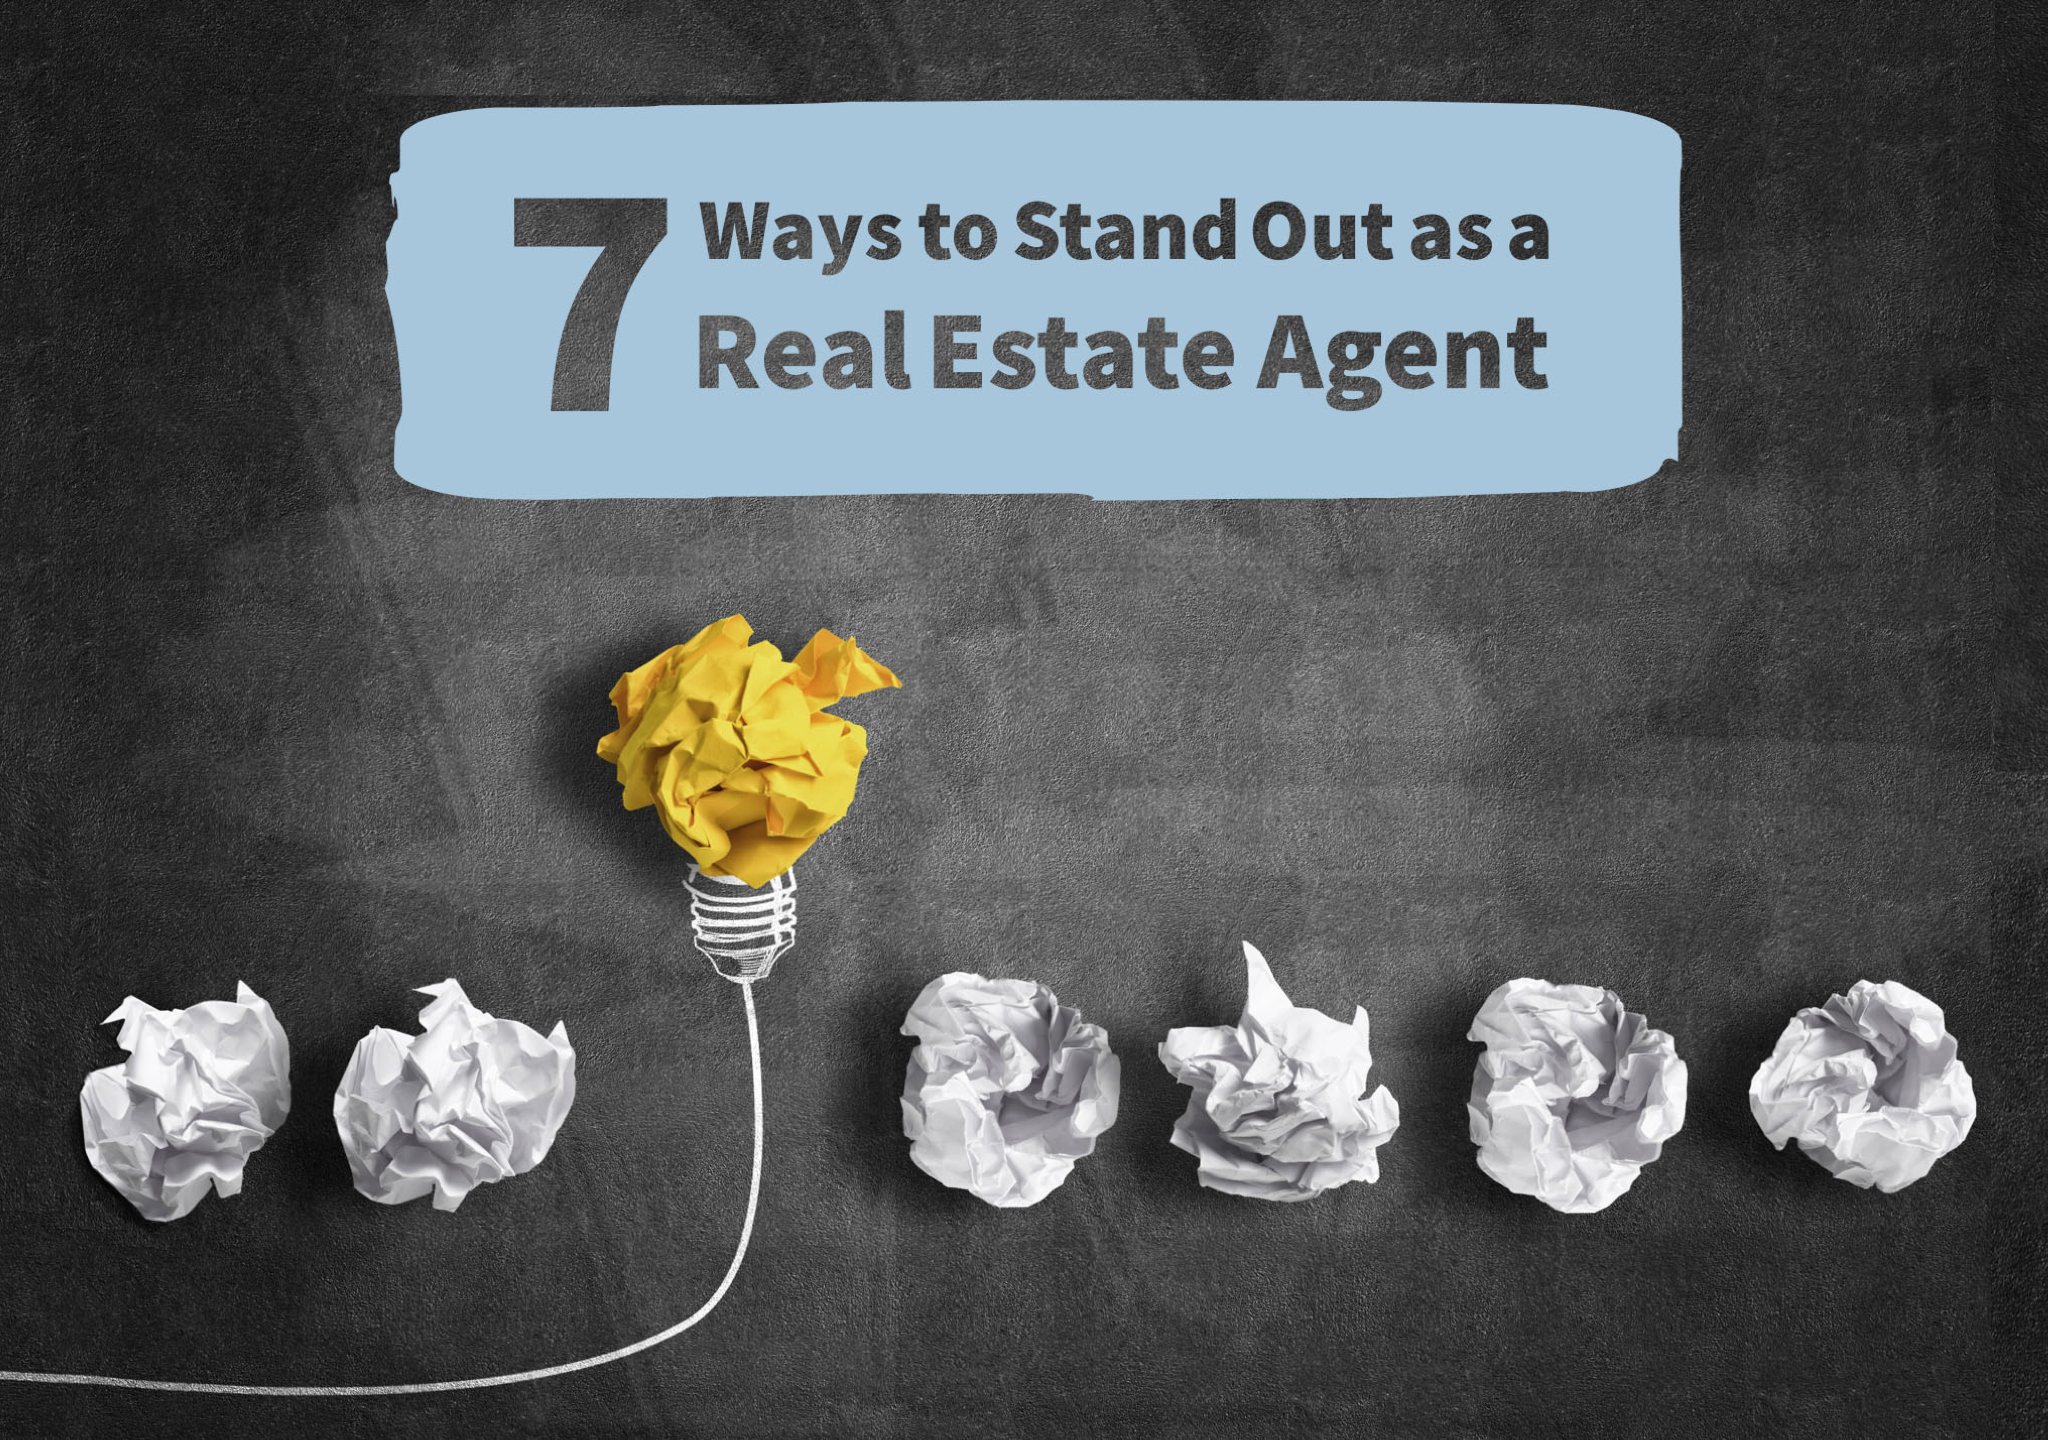 7 Ways to Stand Out as a Real Estate Agent